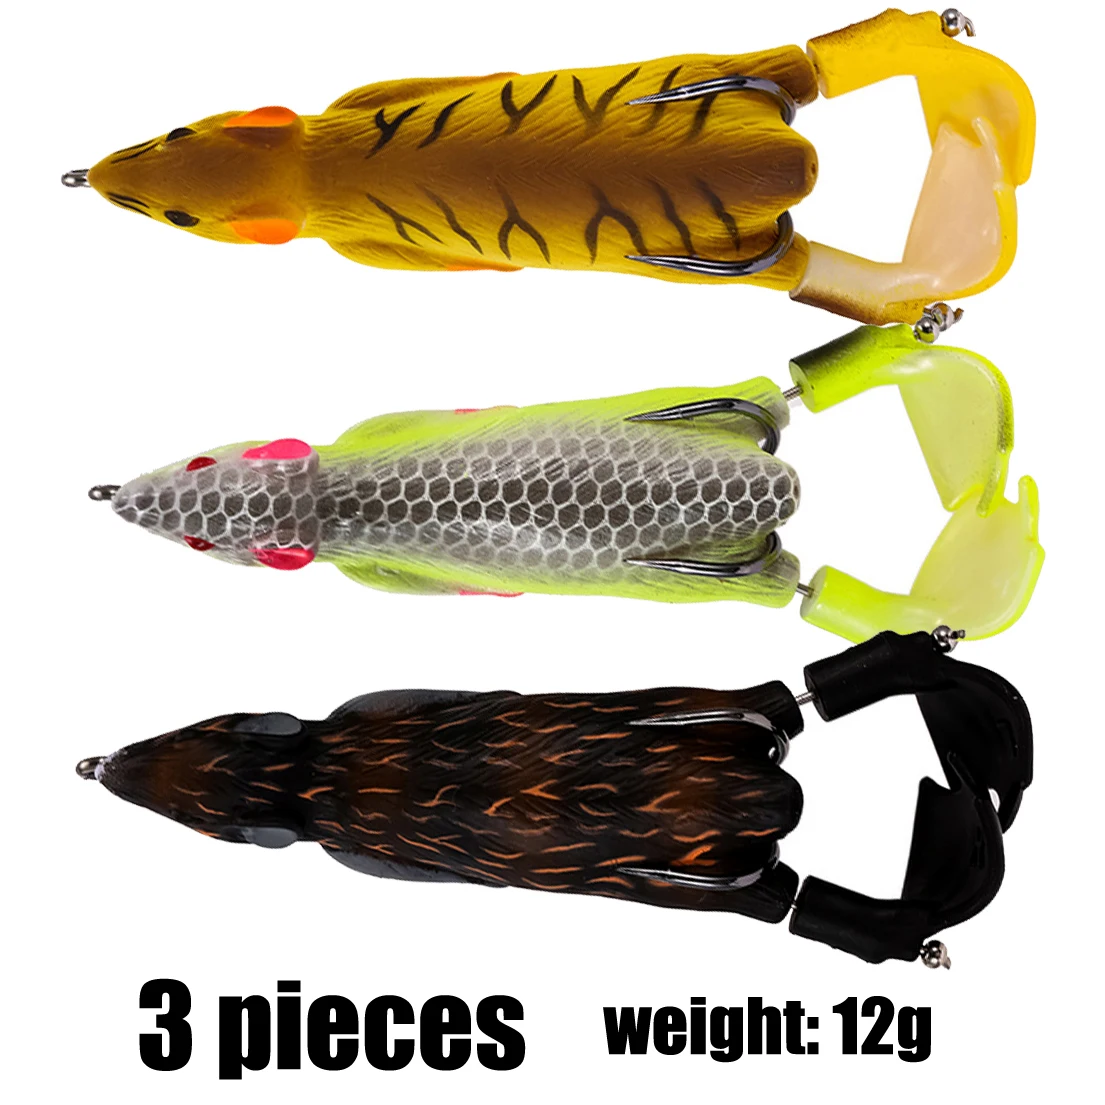 3pcs/lot Topwater Fishing Lures for Bass, Super Soft Hollow Rubber